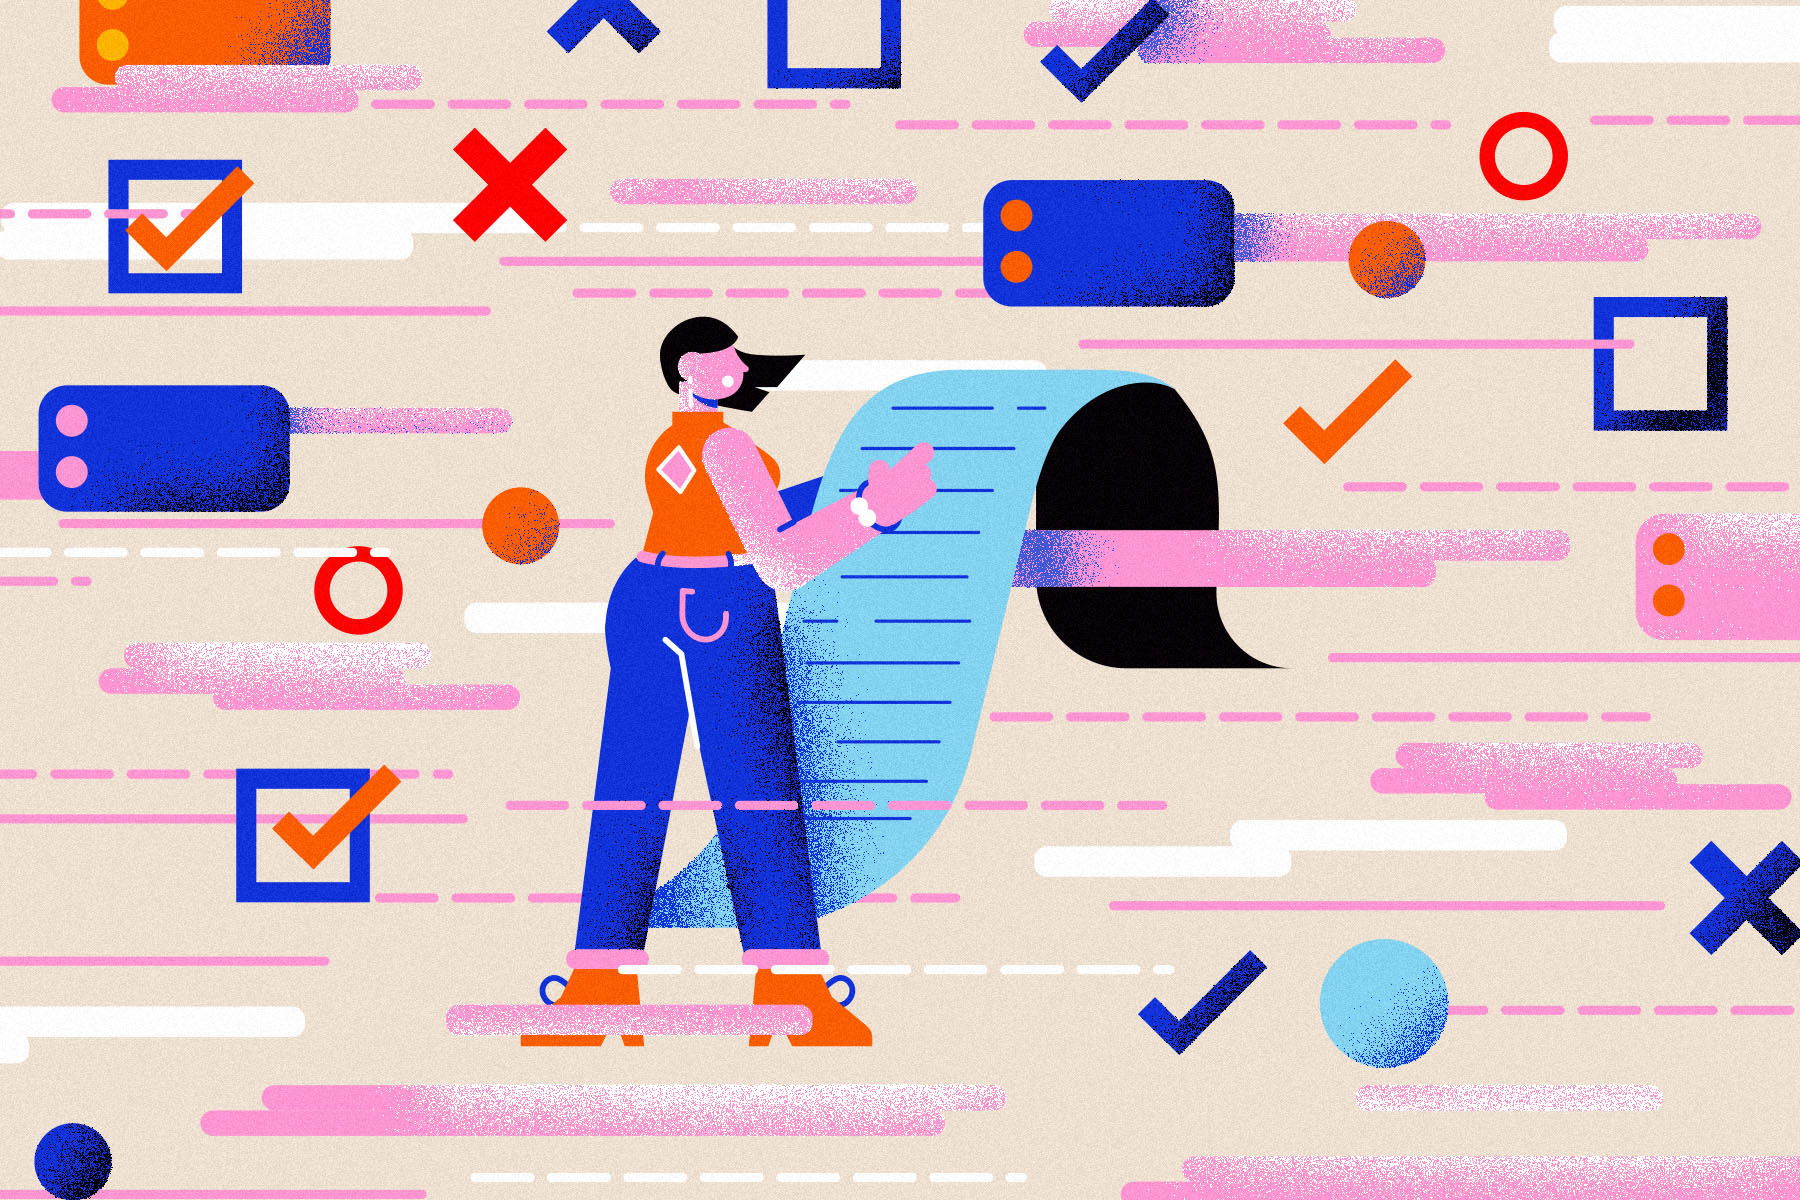 An illustration of a woman being blown away by schedule obligations (tick marks, phones, and Xs) in shades of pink, blue and red